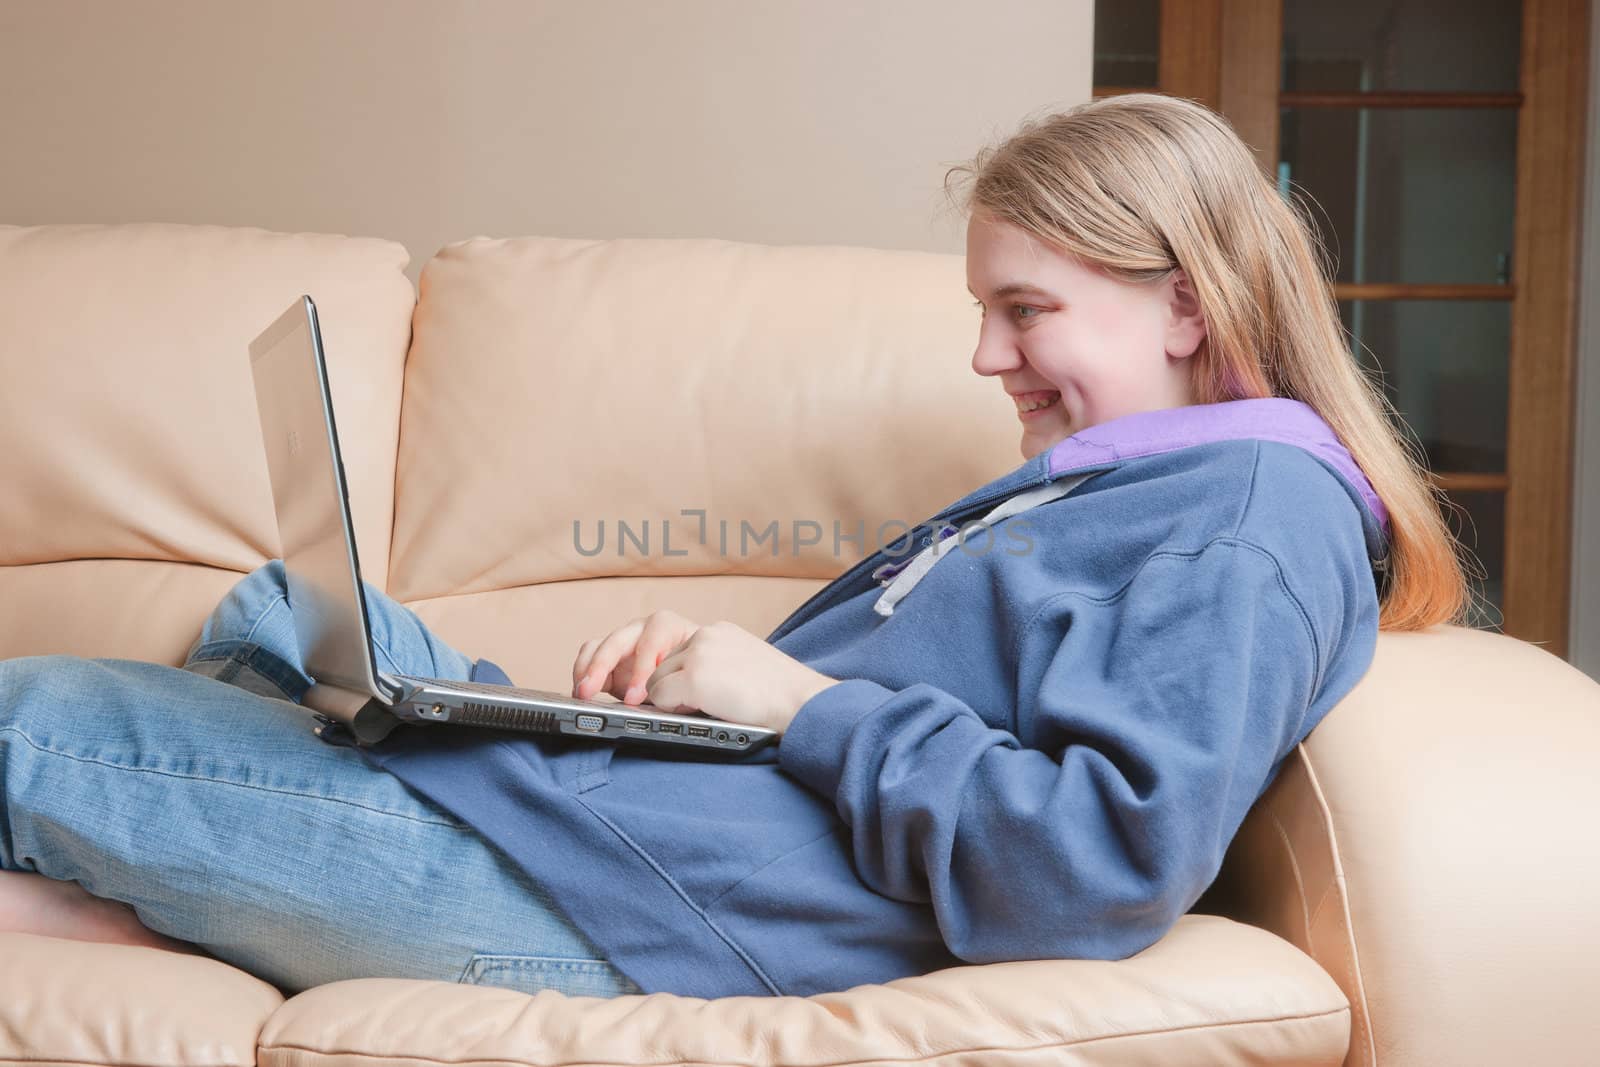 teenager using laptop on sofa by clearviewstock